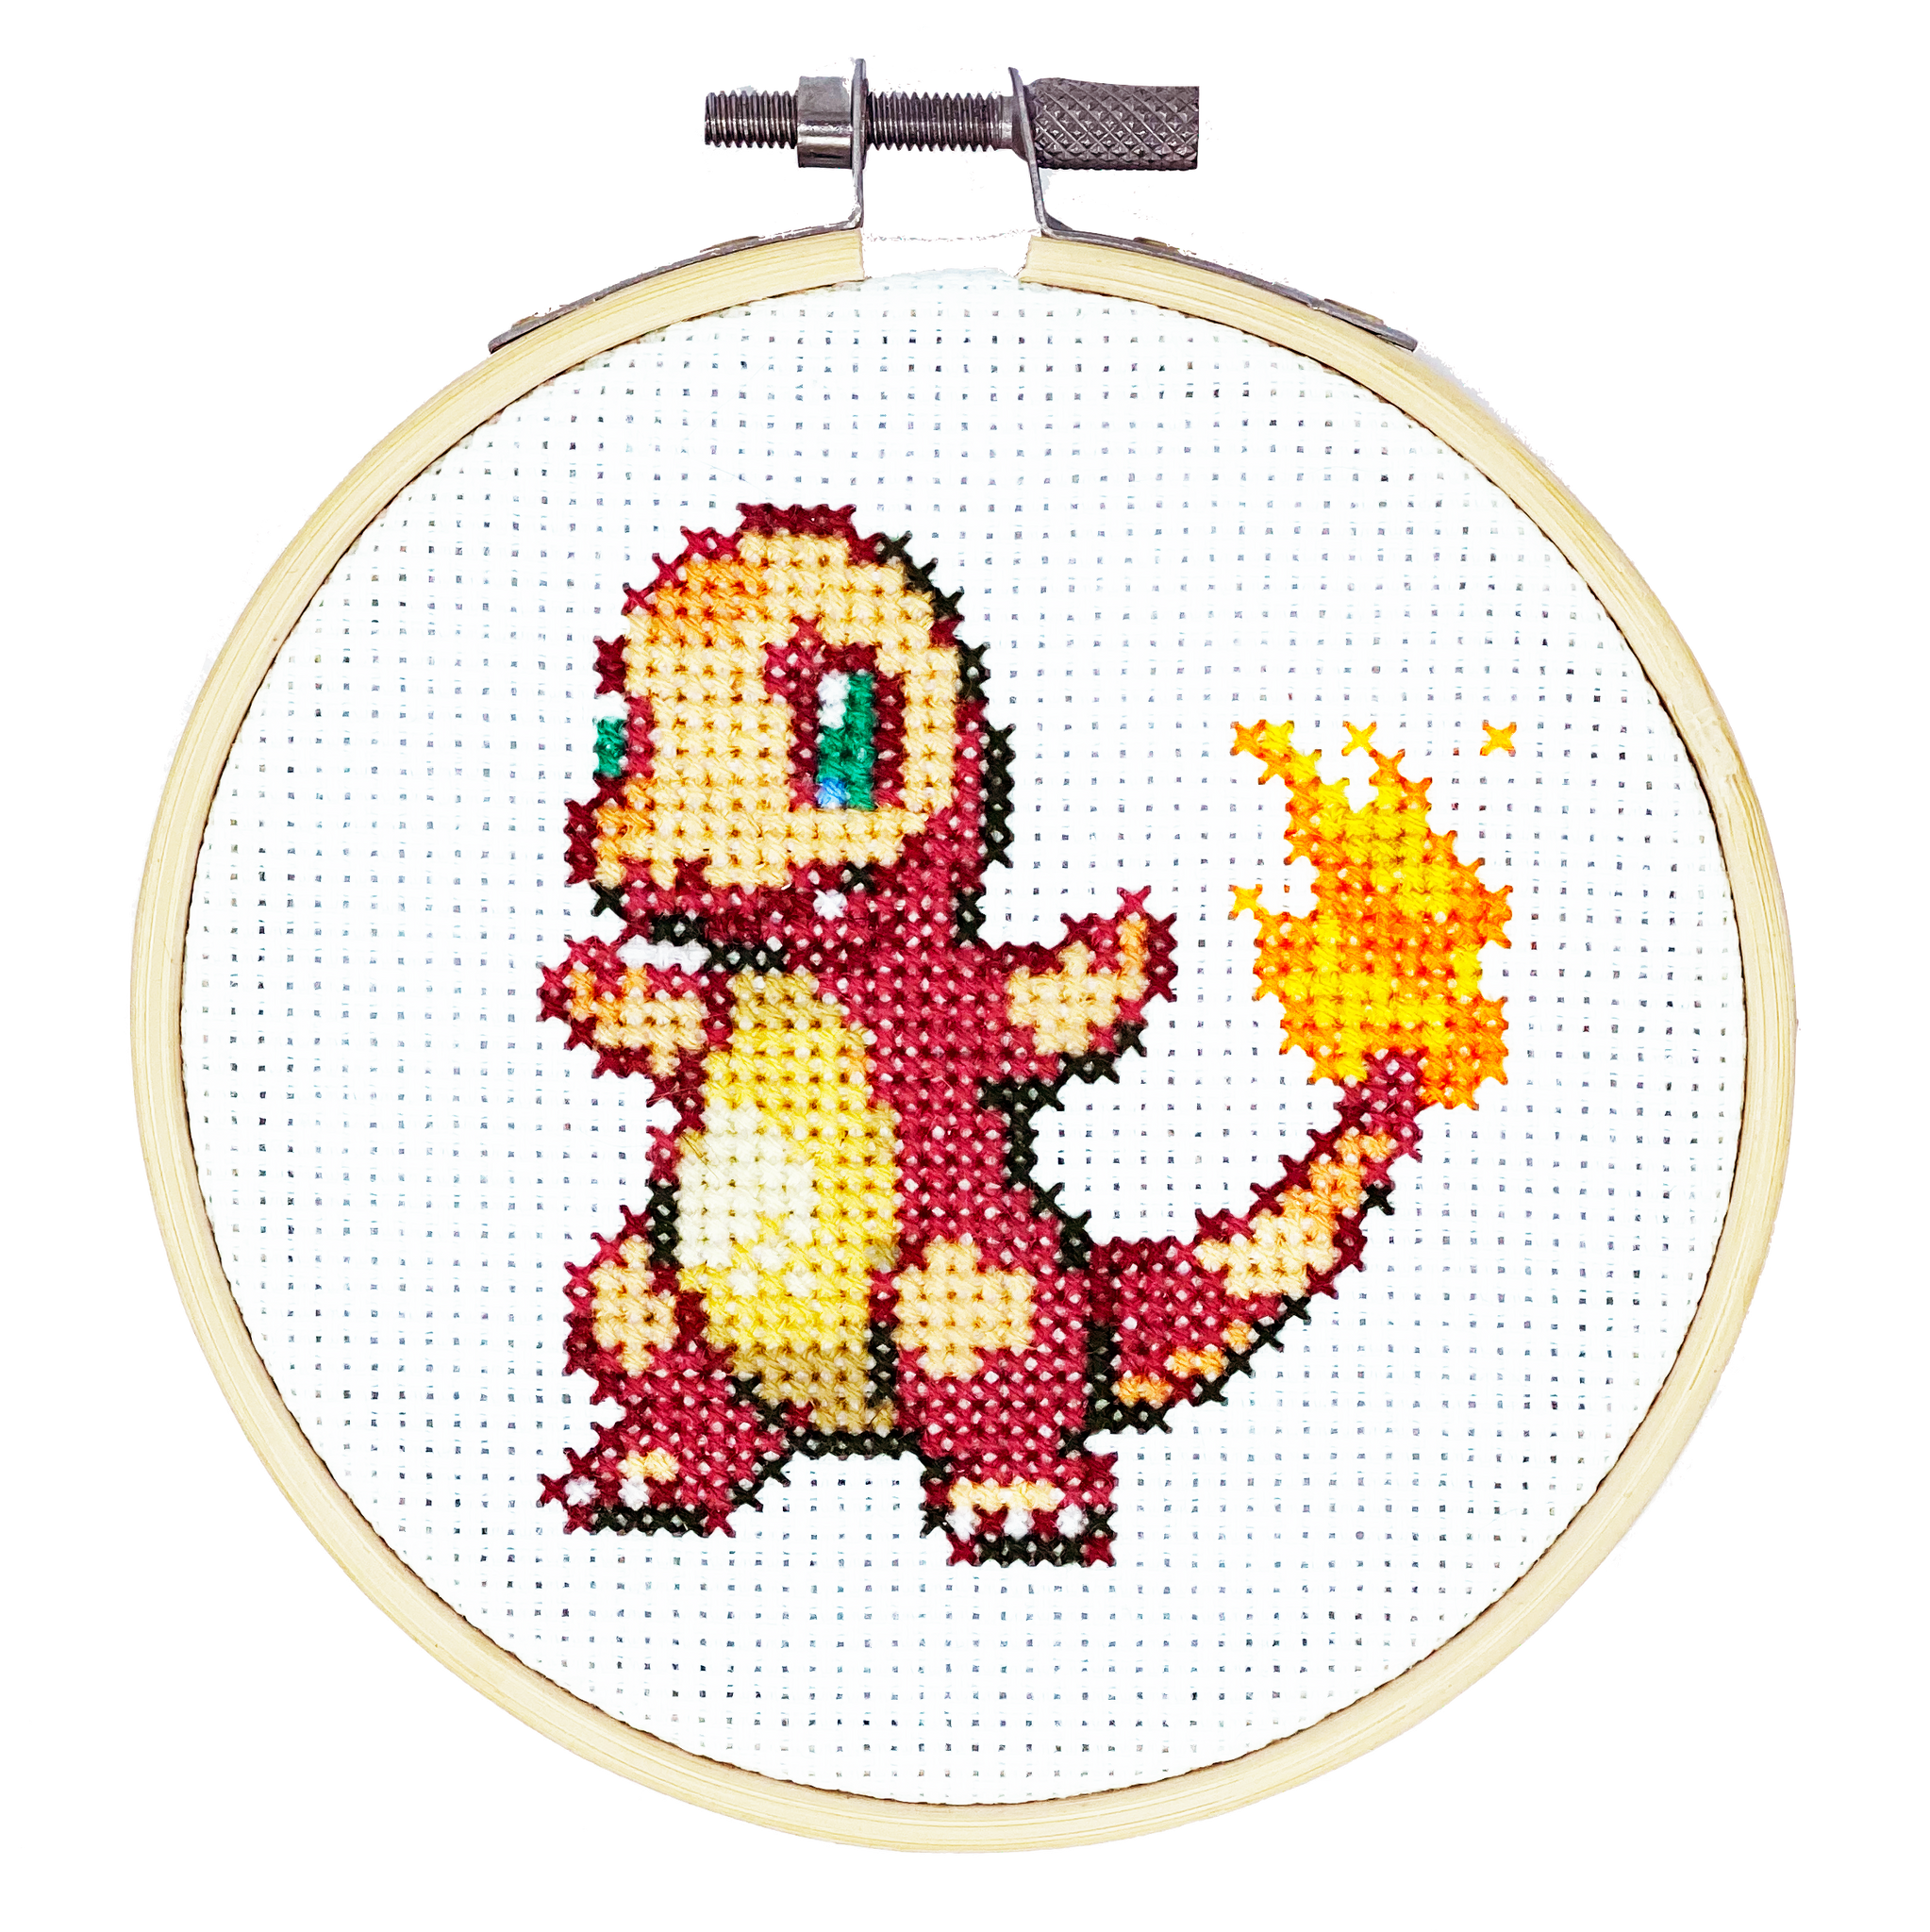 Charmander Pokemon DIY Cross Stitch Kit, Craft Kit, Gotta Stitch Them All, TheCloudFactory craft store, The Cloud Factory, Cloth Aida, Embroidery Floss, Embroidery Hoop, Embroidery Needle, Pattern, Beginner's guide, felt square